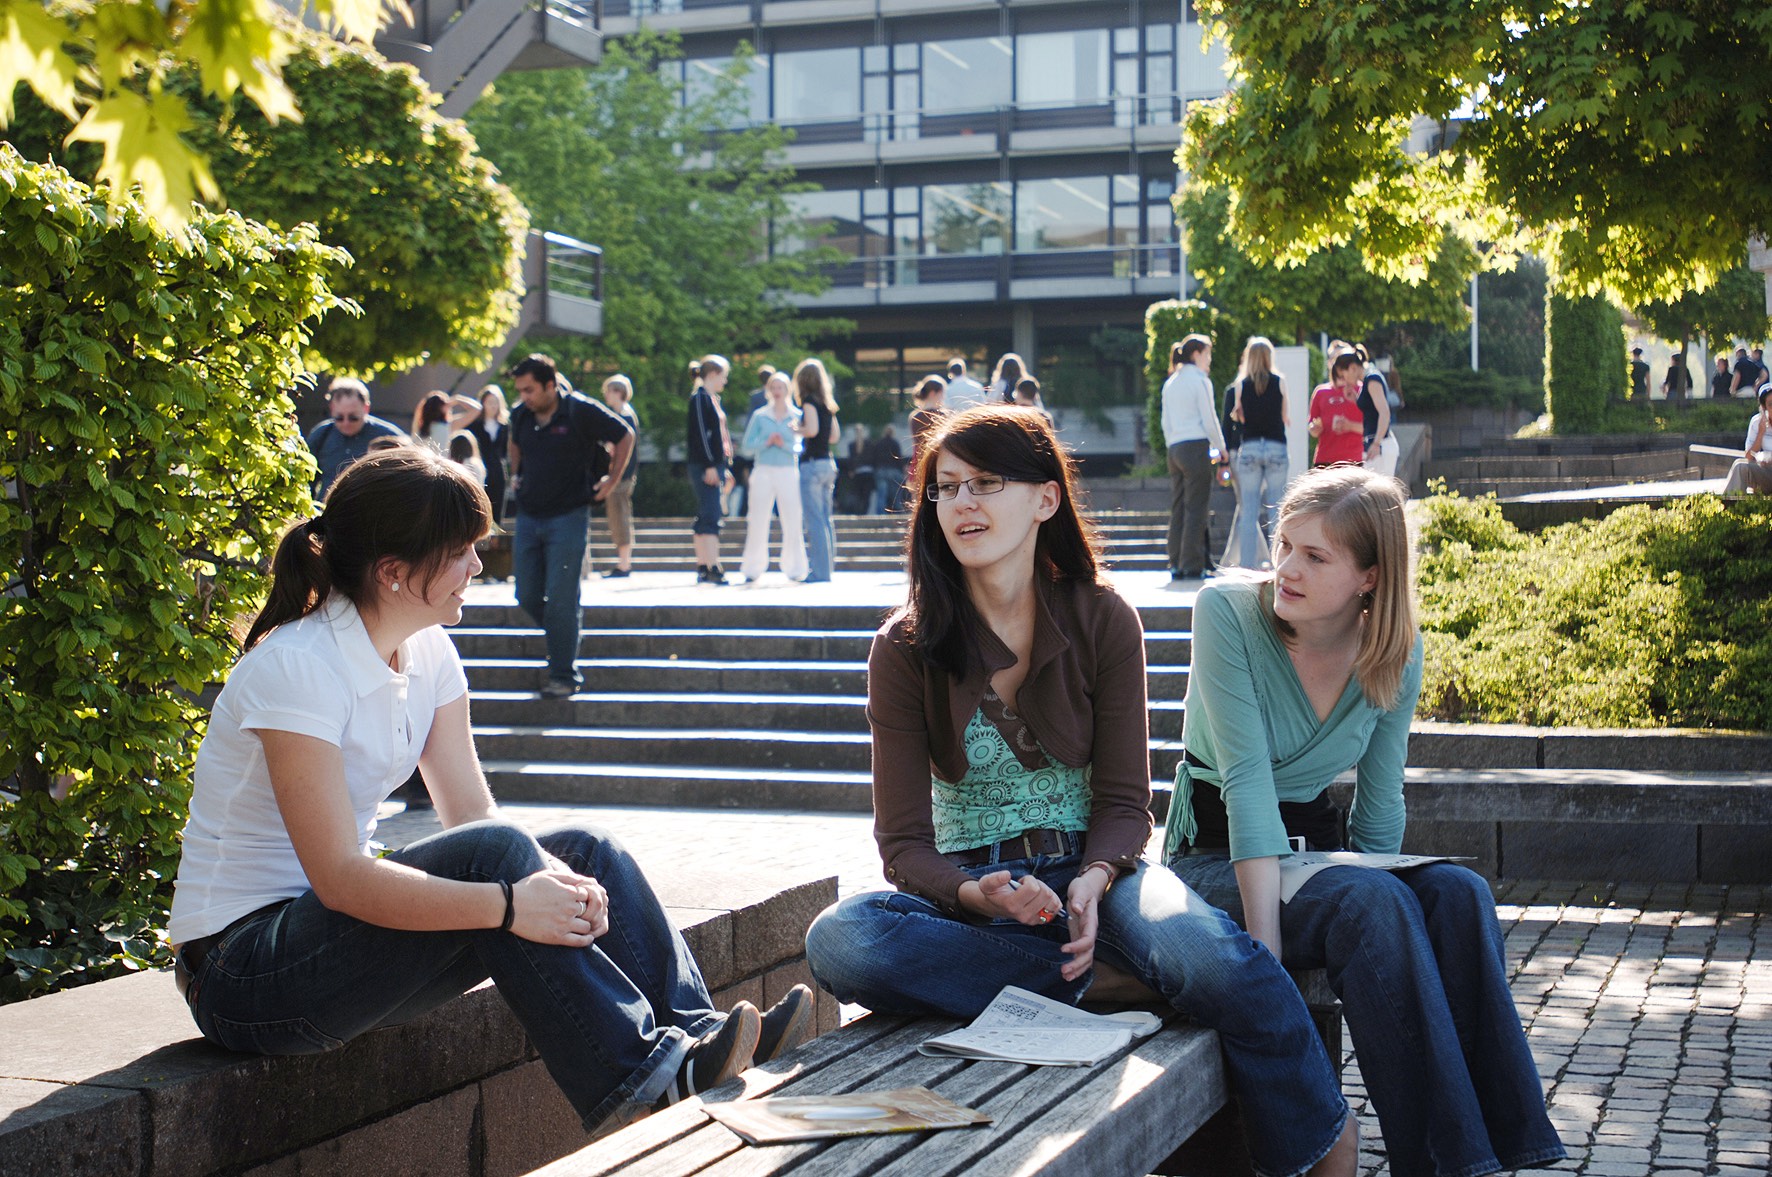 Students at Irchel Campus